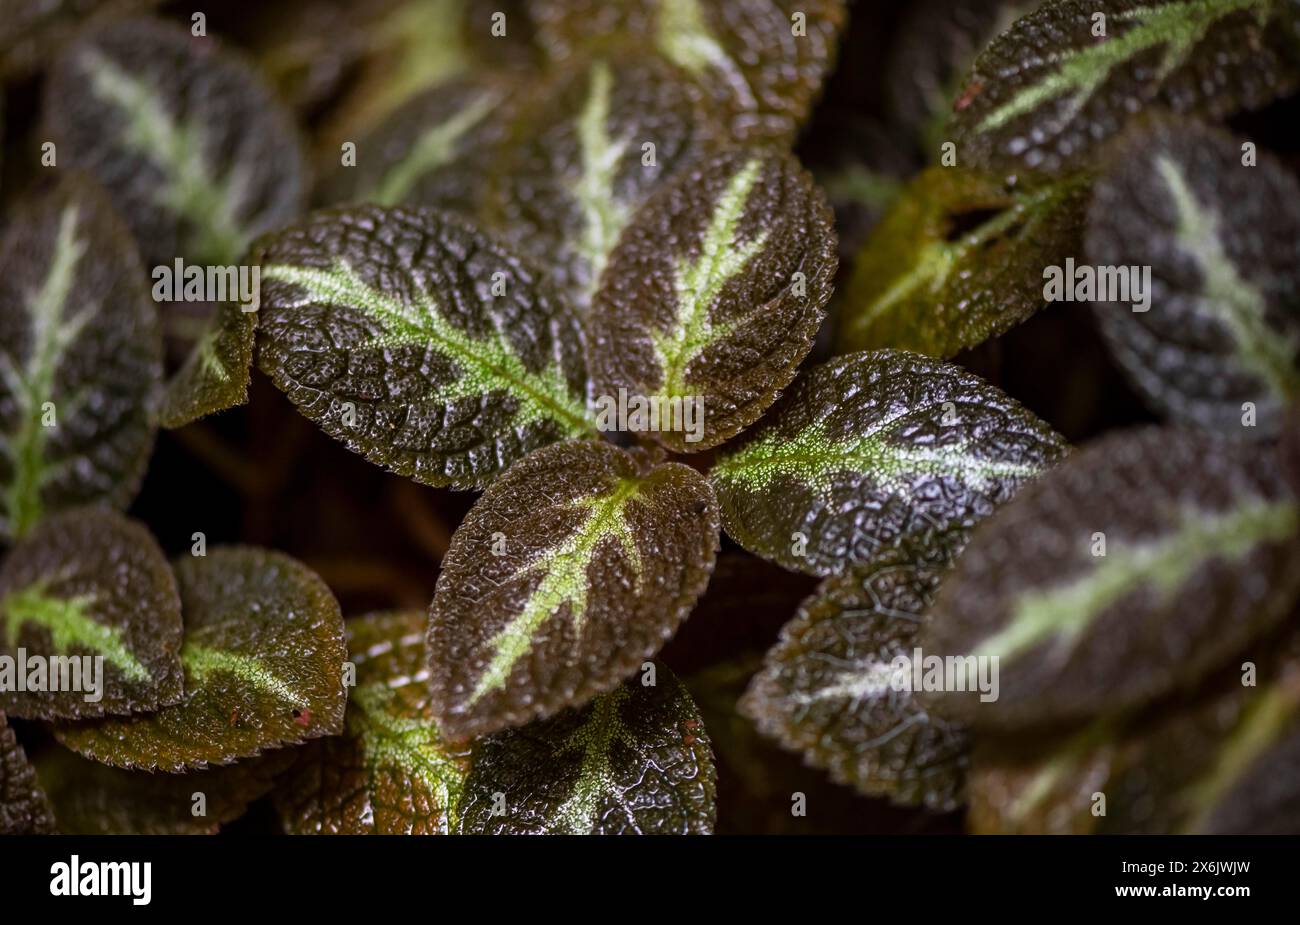 Shade tube (Episcia), leaves with light green veins, Tortuguero National Park, Costa Rica, Central America Stock Photo